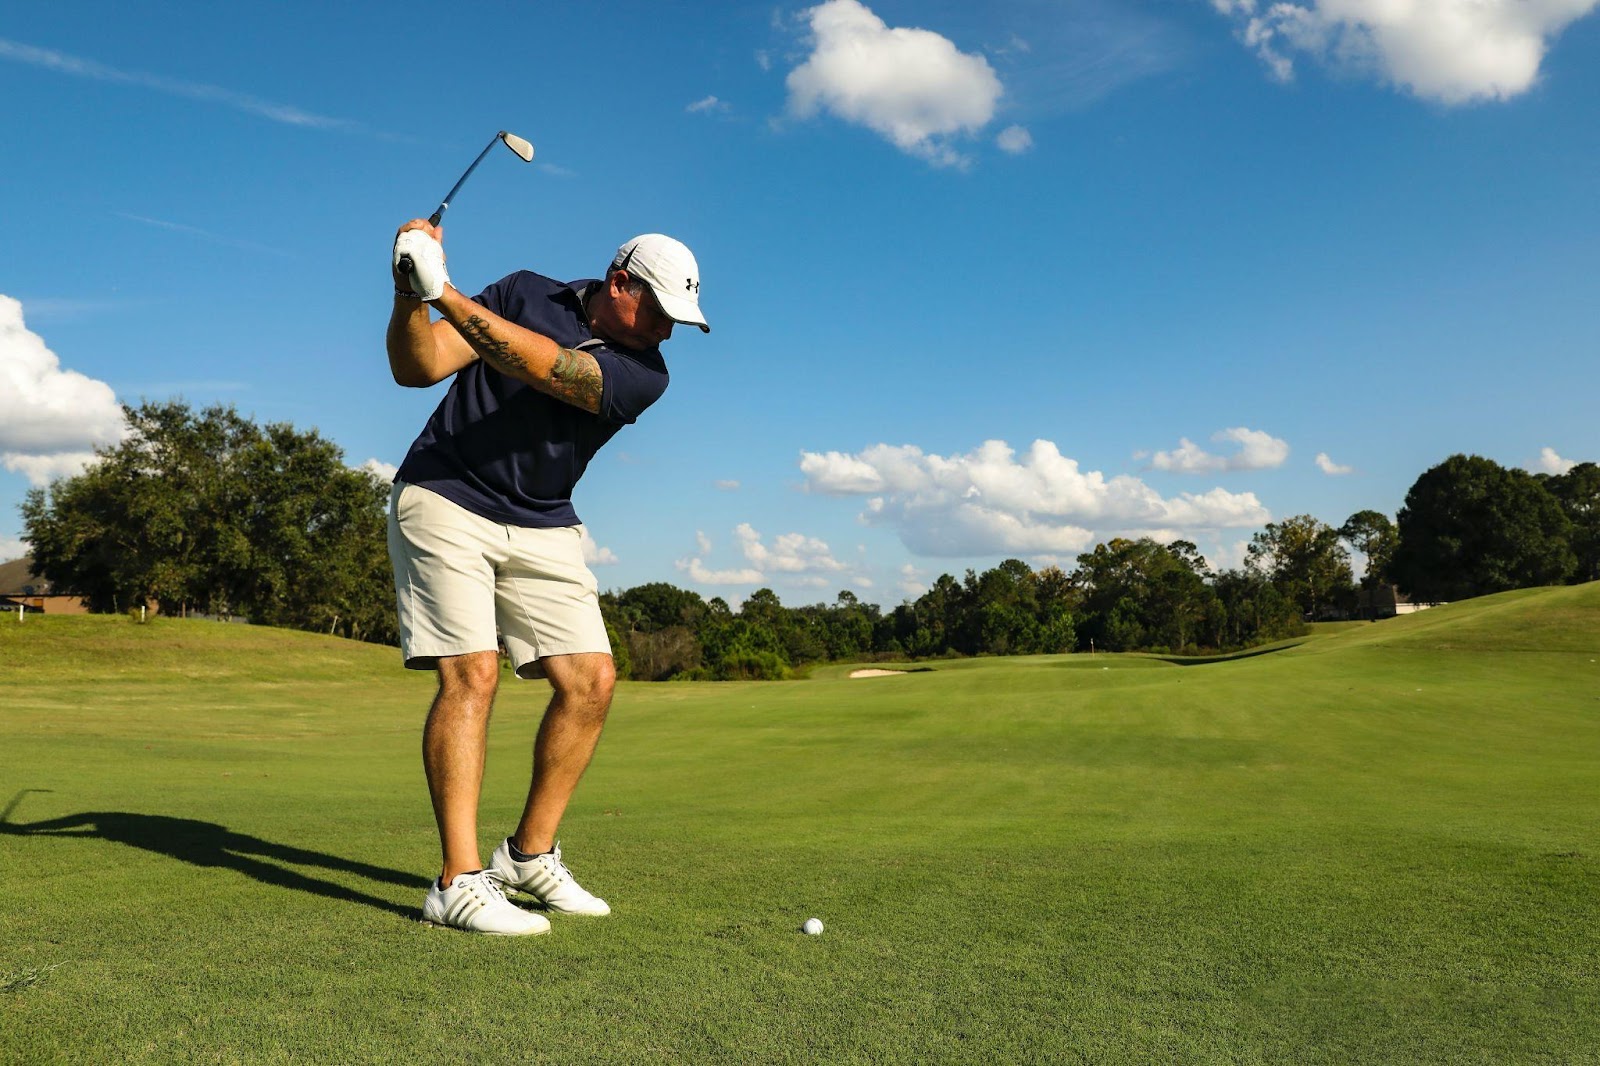 How much of a difference do better golf clubs make?
